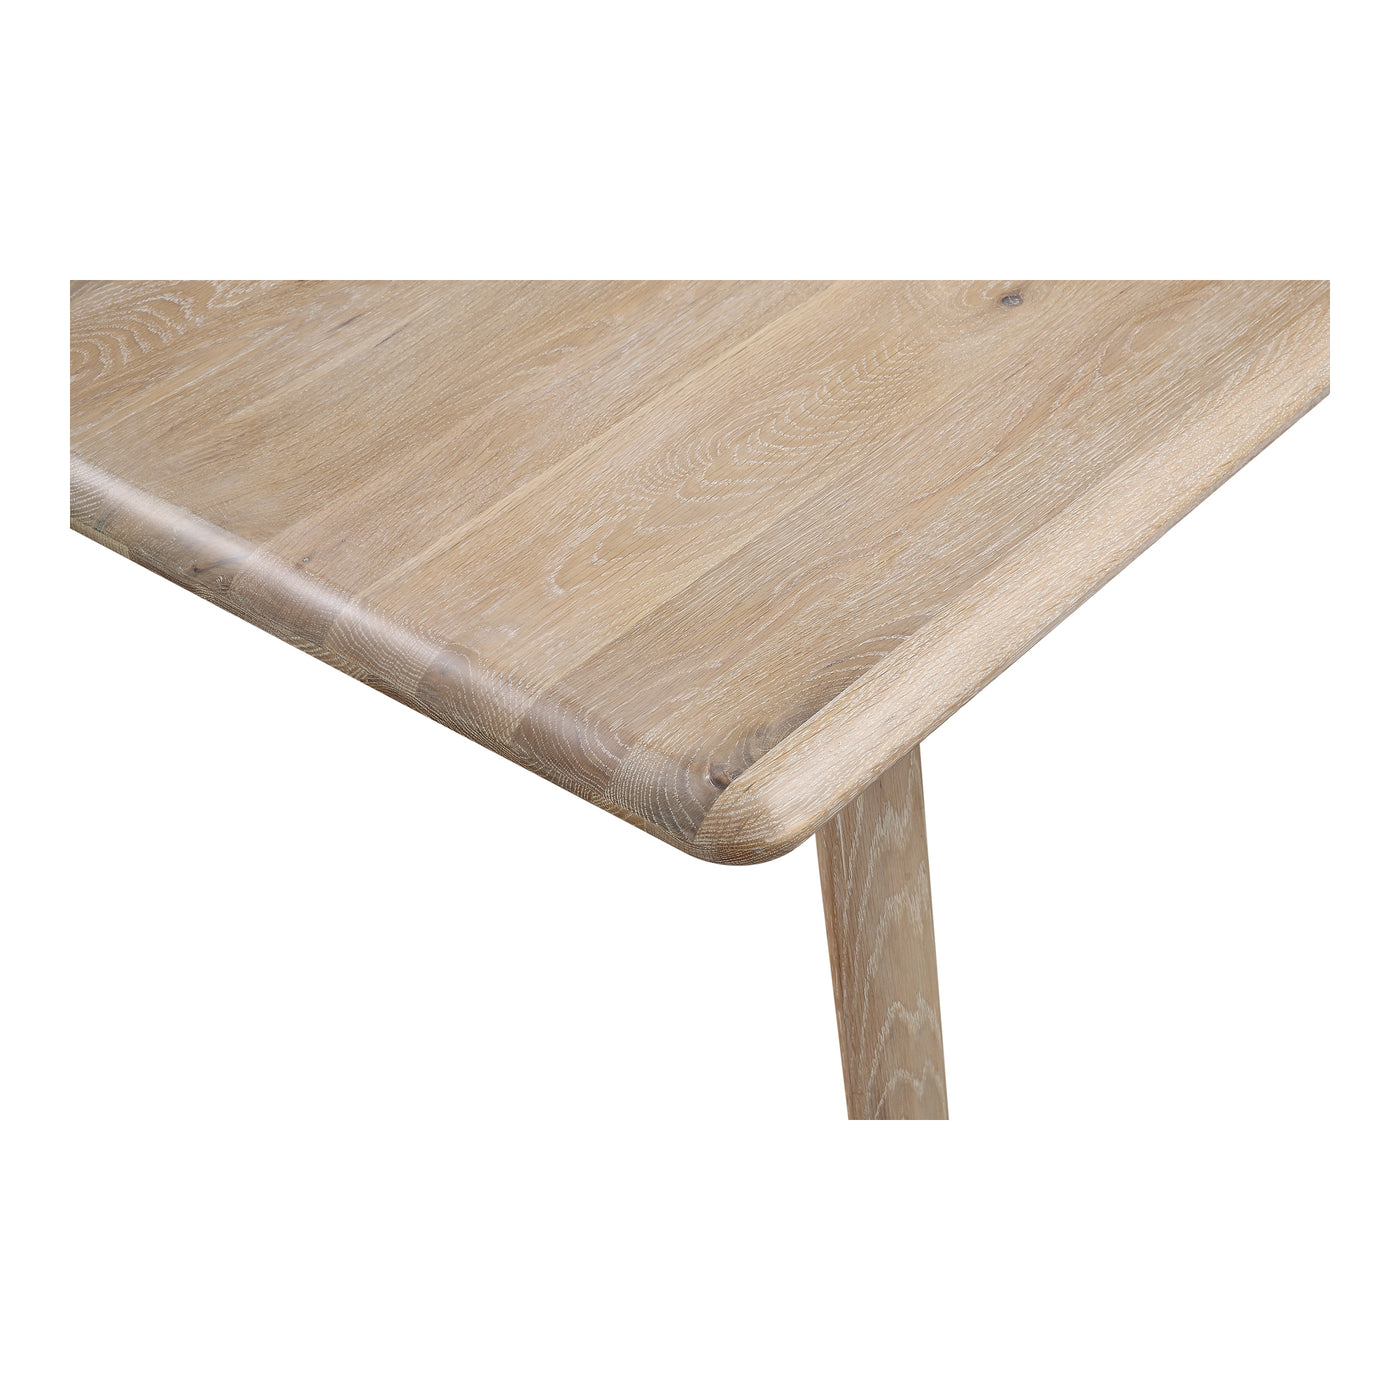 The Malibu dining table embodies an organic aesthetic throughout its design. Thick pieces of solid white oakwood are used ...